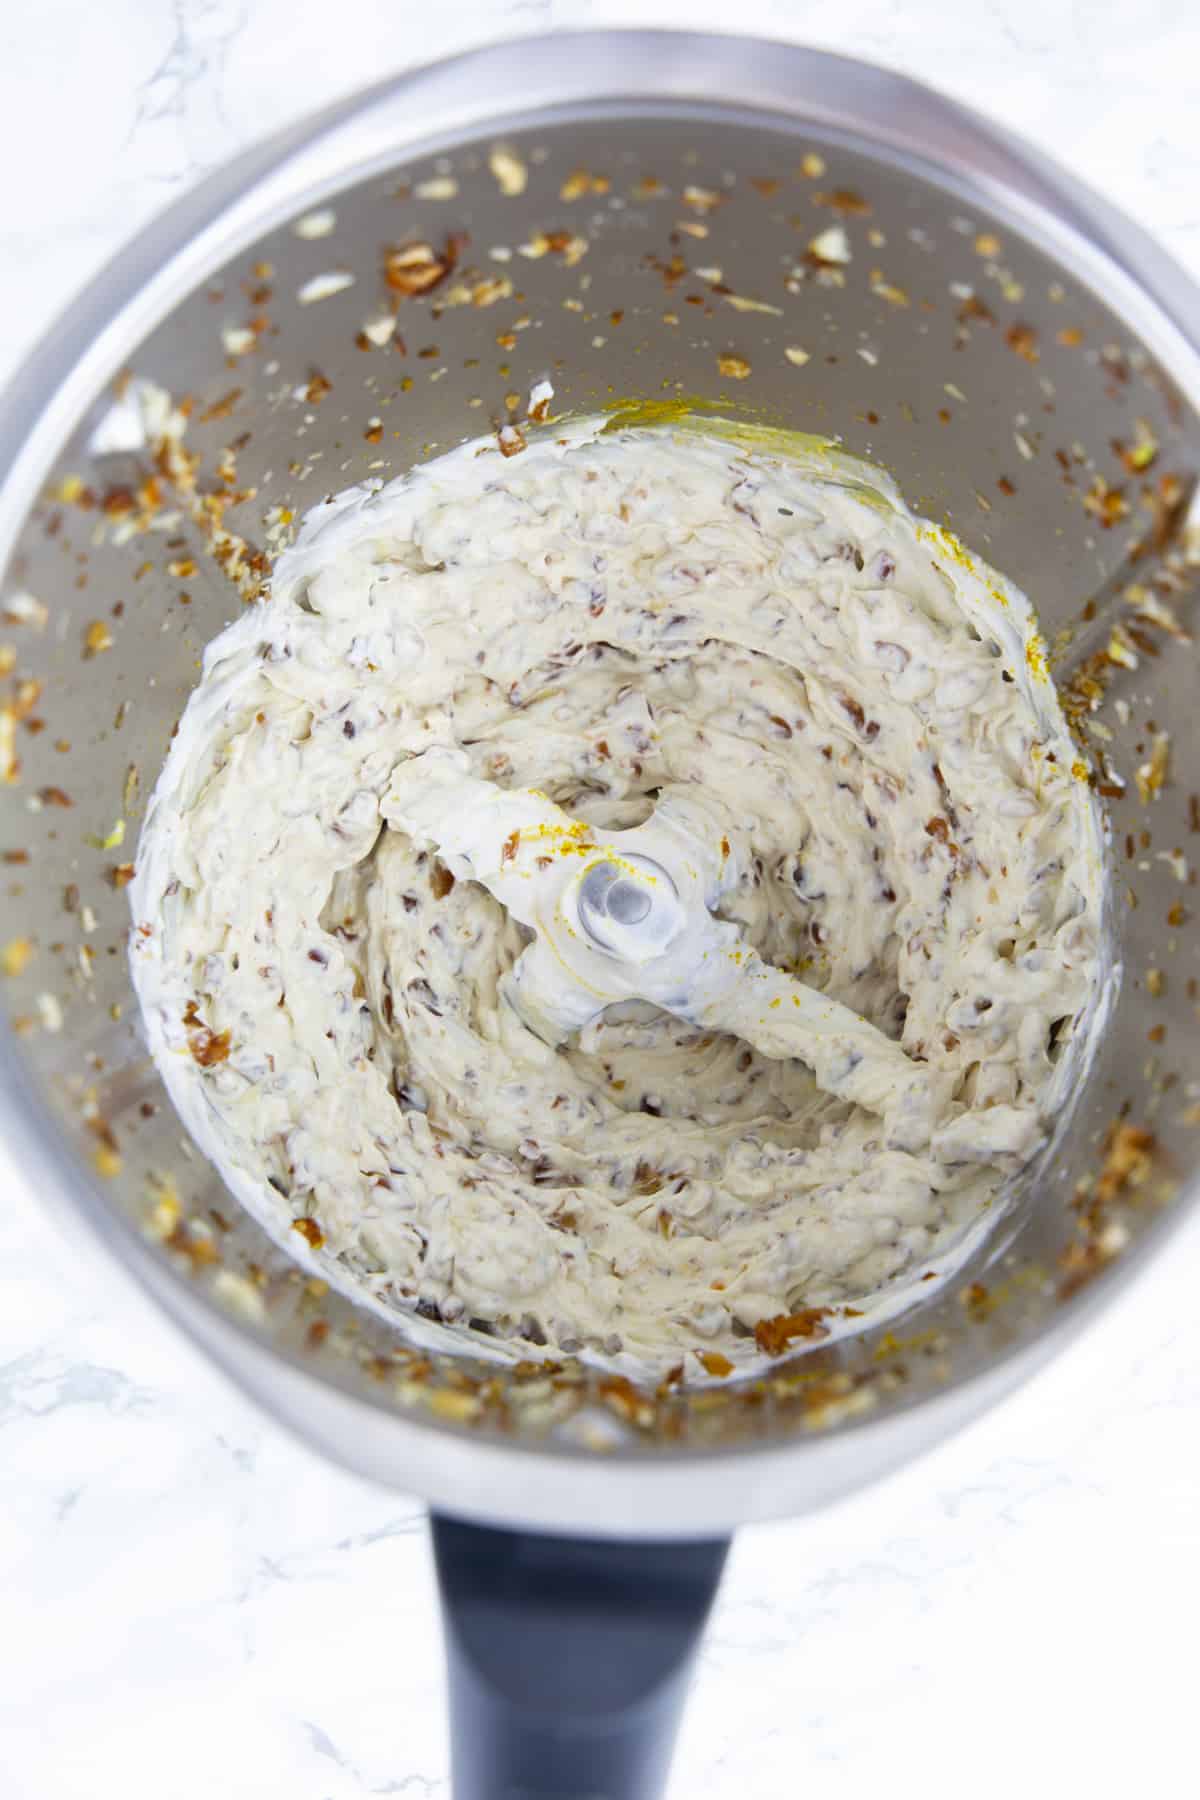 a vegan cream cheese dip in a blender on a marble countertop 